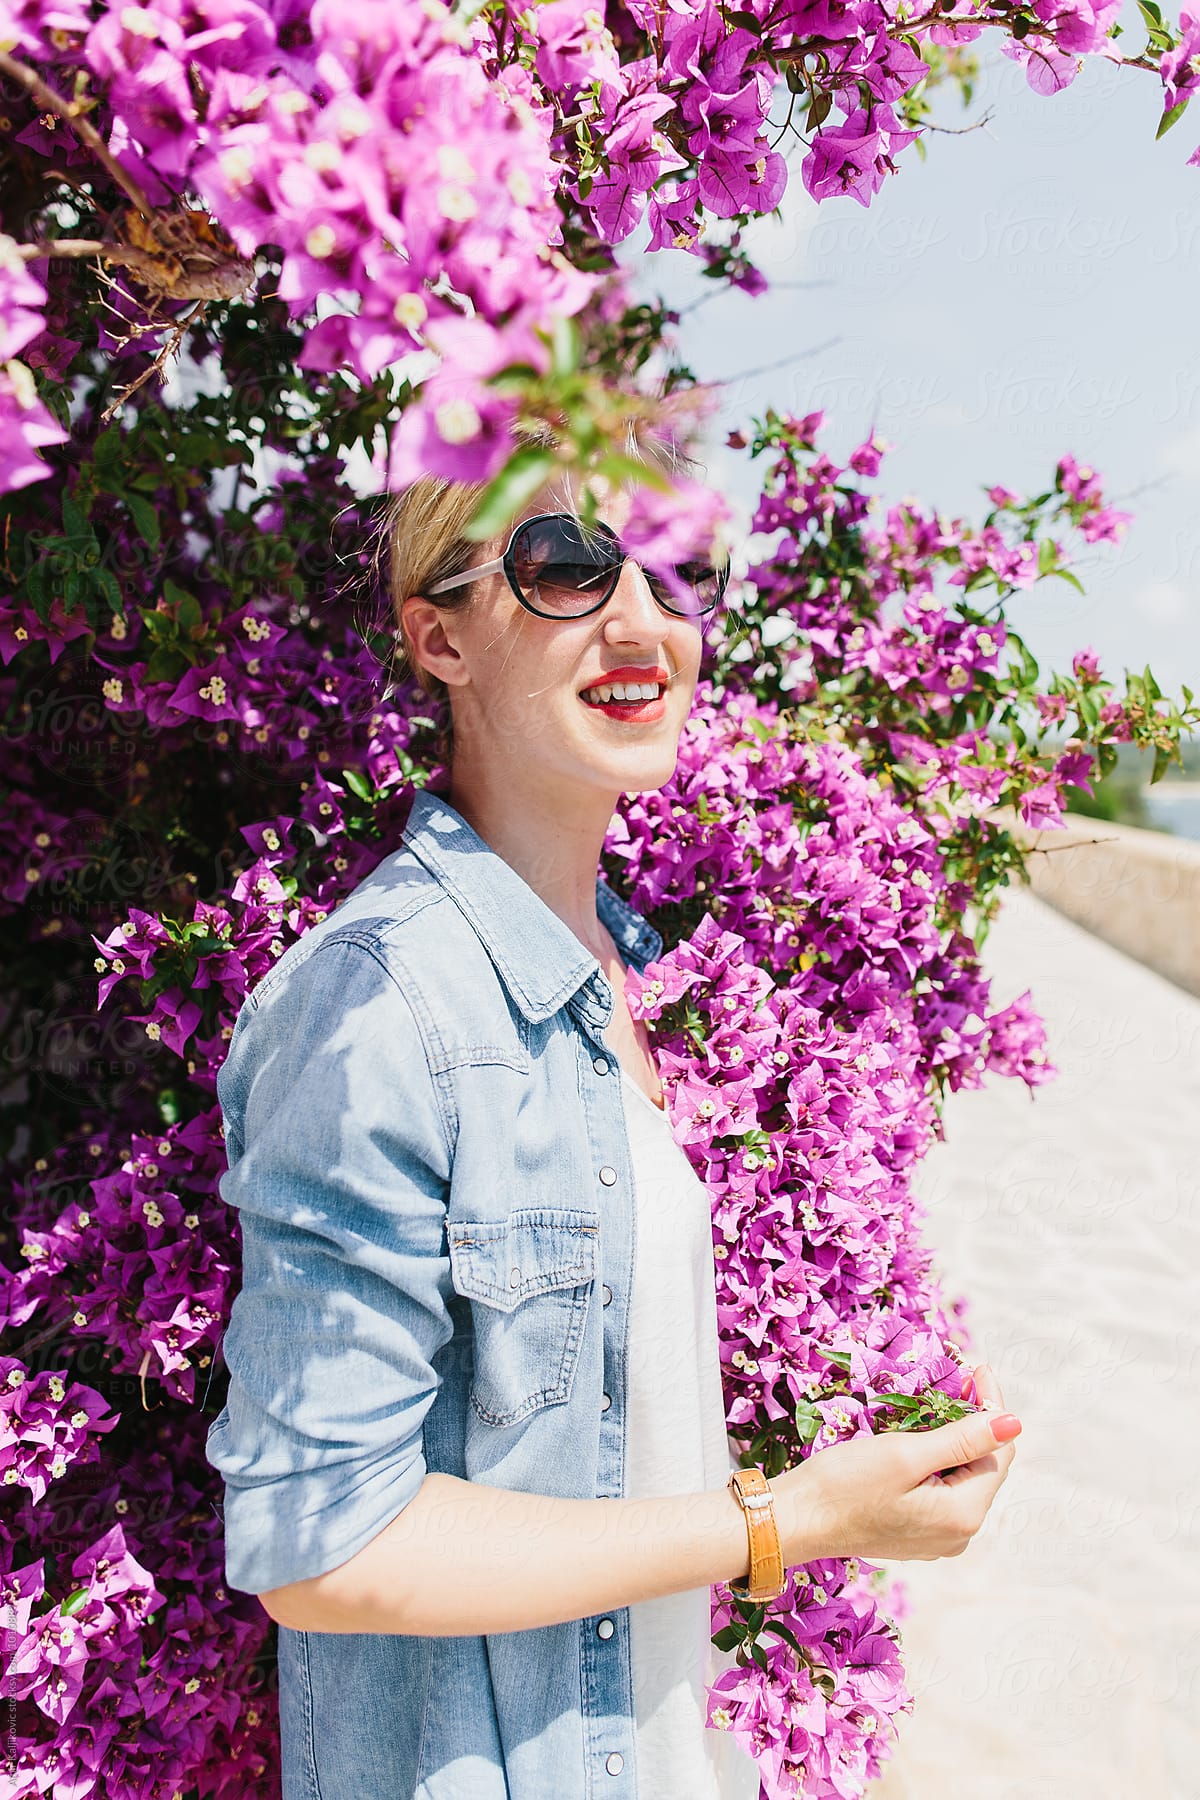 Grinning woman in sun surrounded by purple blooms